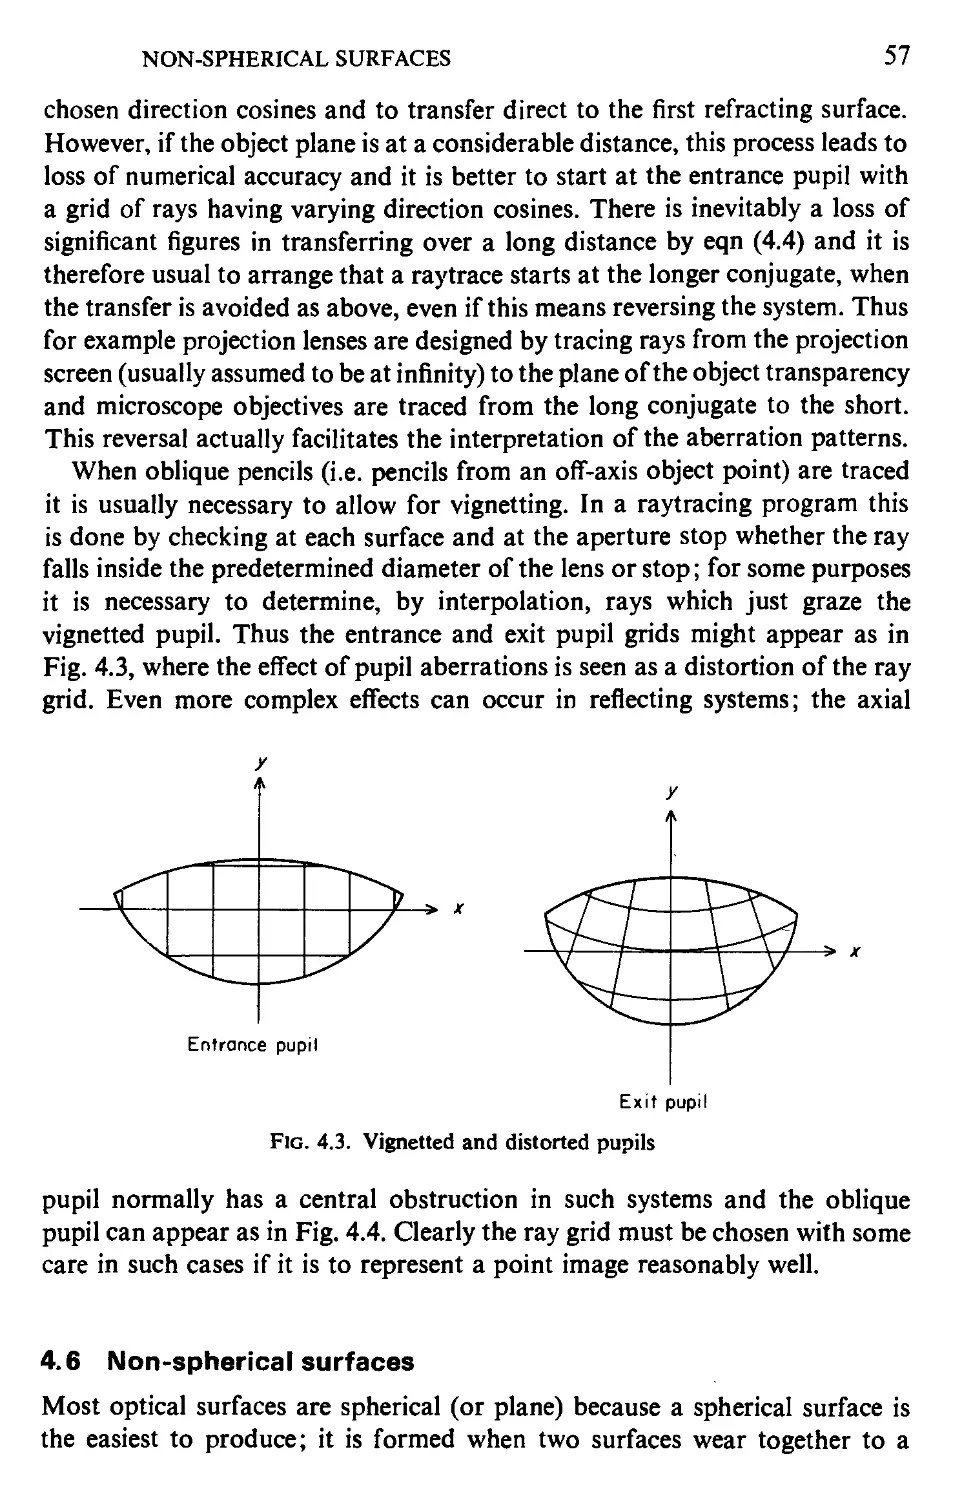 4.6 Non-spherical surfaces